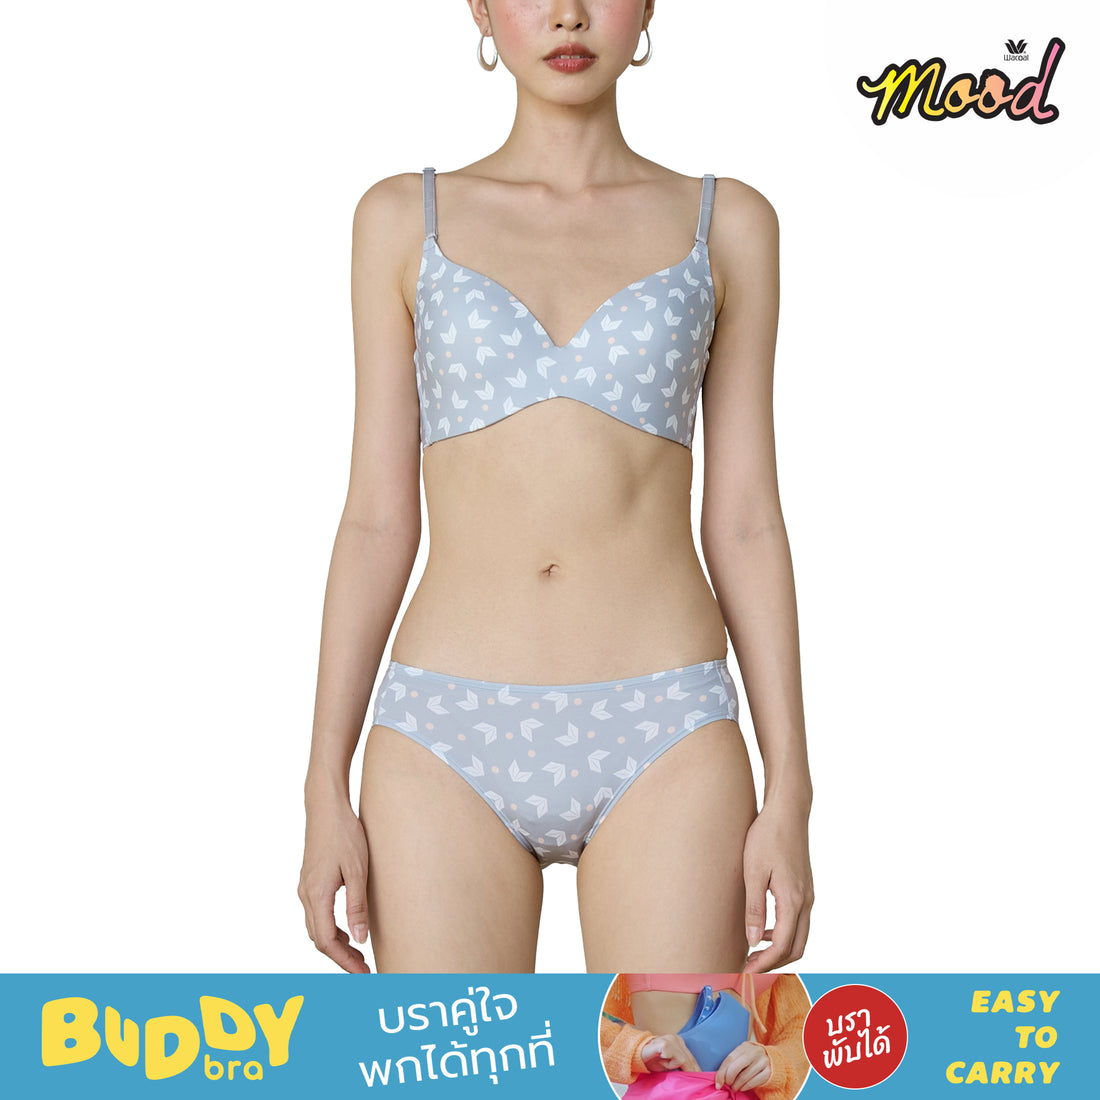 Wacoal Mood BUDDY BRA, your favorite bra, can be taken anywhere, easy to  wear, easy to fold, easy to carry, model MMX88 (matching MUMX88), light